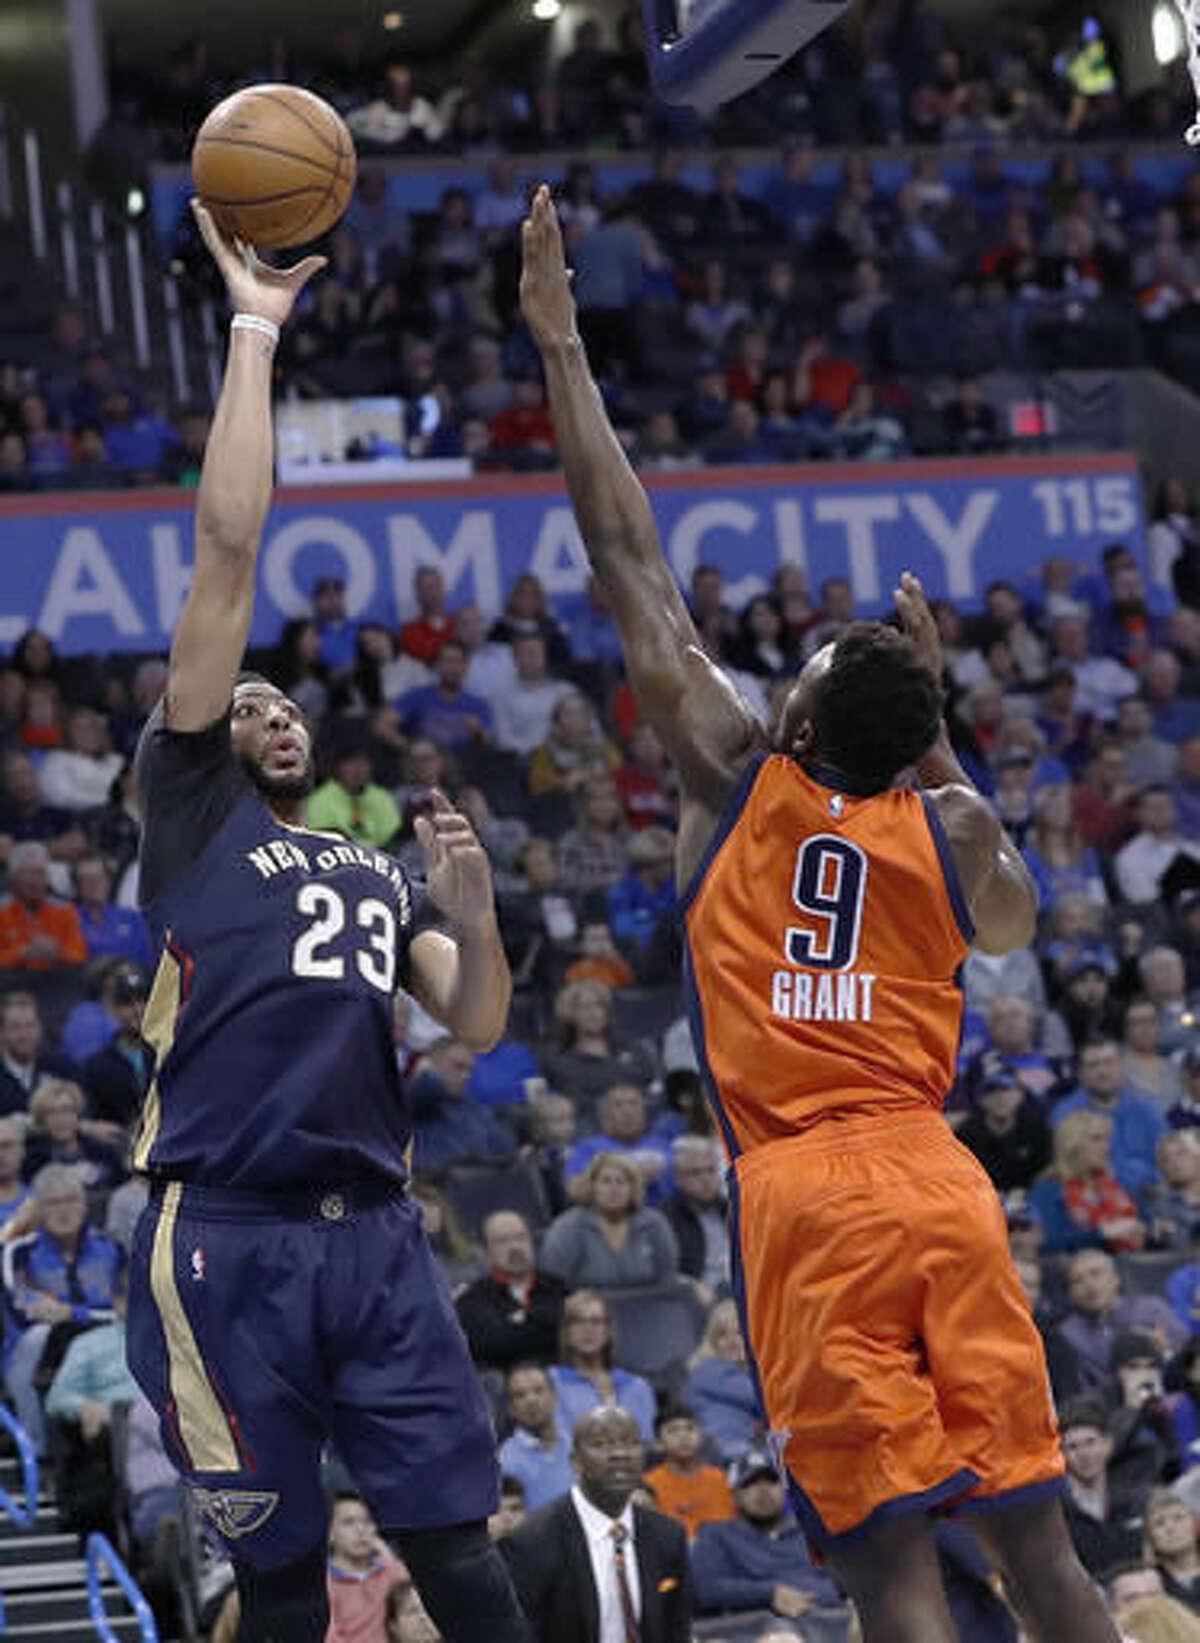 New Orleans Pelicans forward Anthony Davis (23) shoots as Oklahoma City Thunder forward Jerami Grant (9) defends during the first half of an NBA basketball game in Oklahoma City, Sunday, Dec. 4, 2016. (AP Photo/Alonzo Adams)